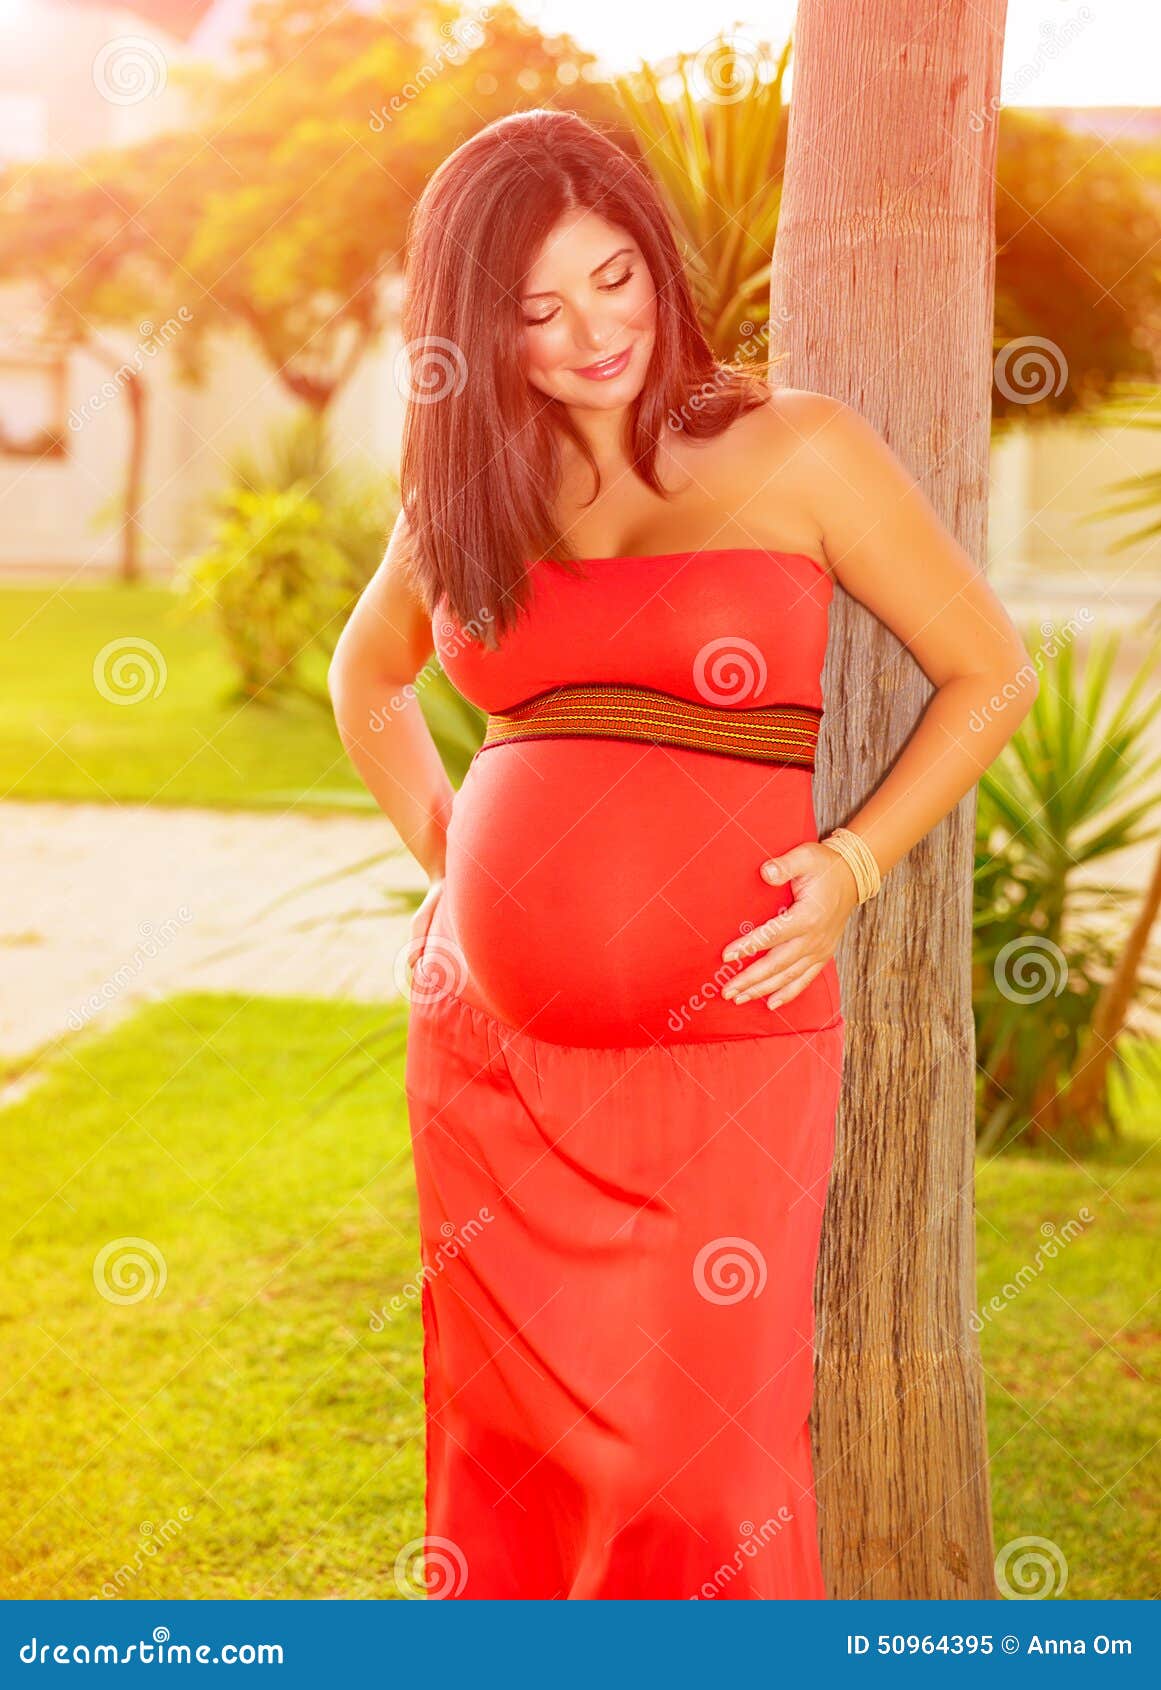 Pregnant Female Outdoors In Summertime Stock Image Image